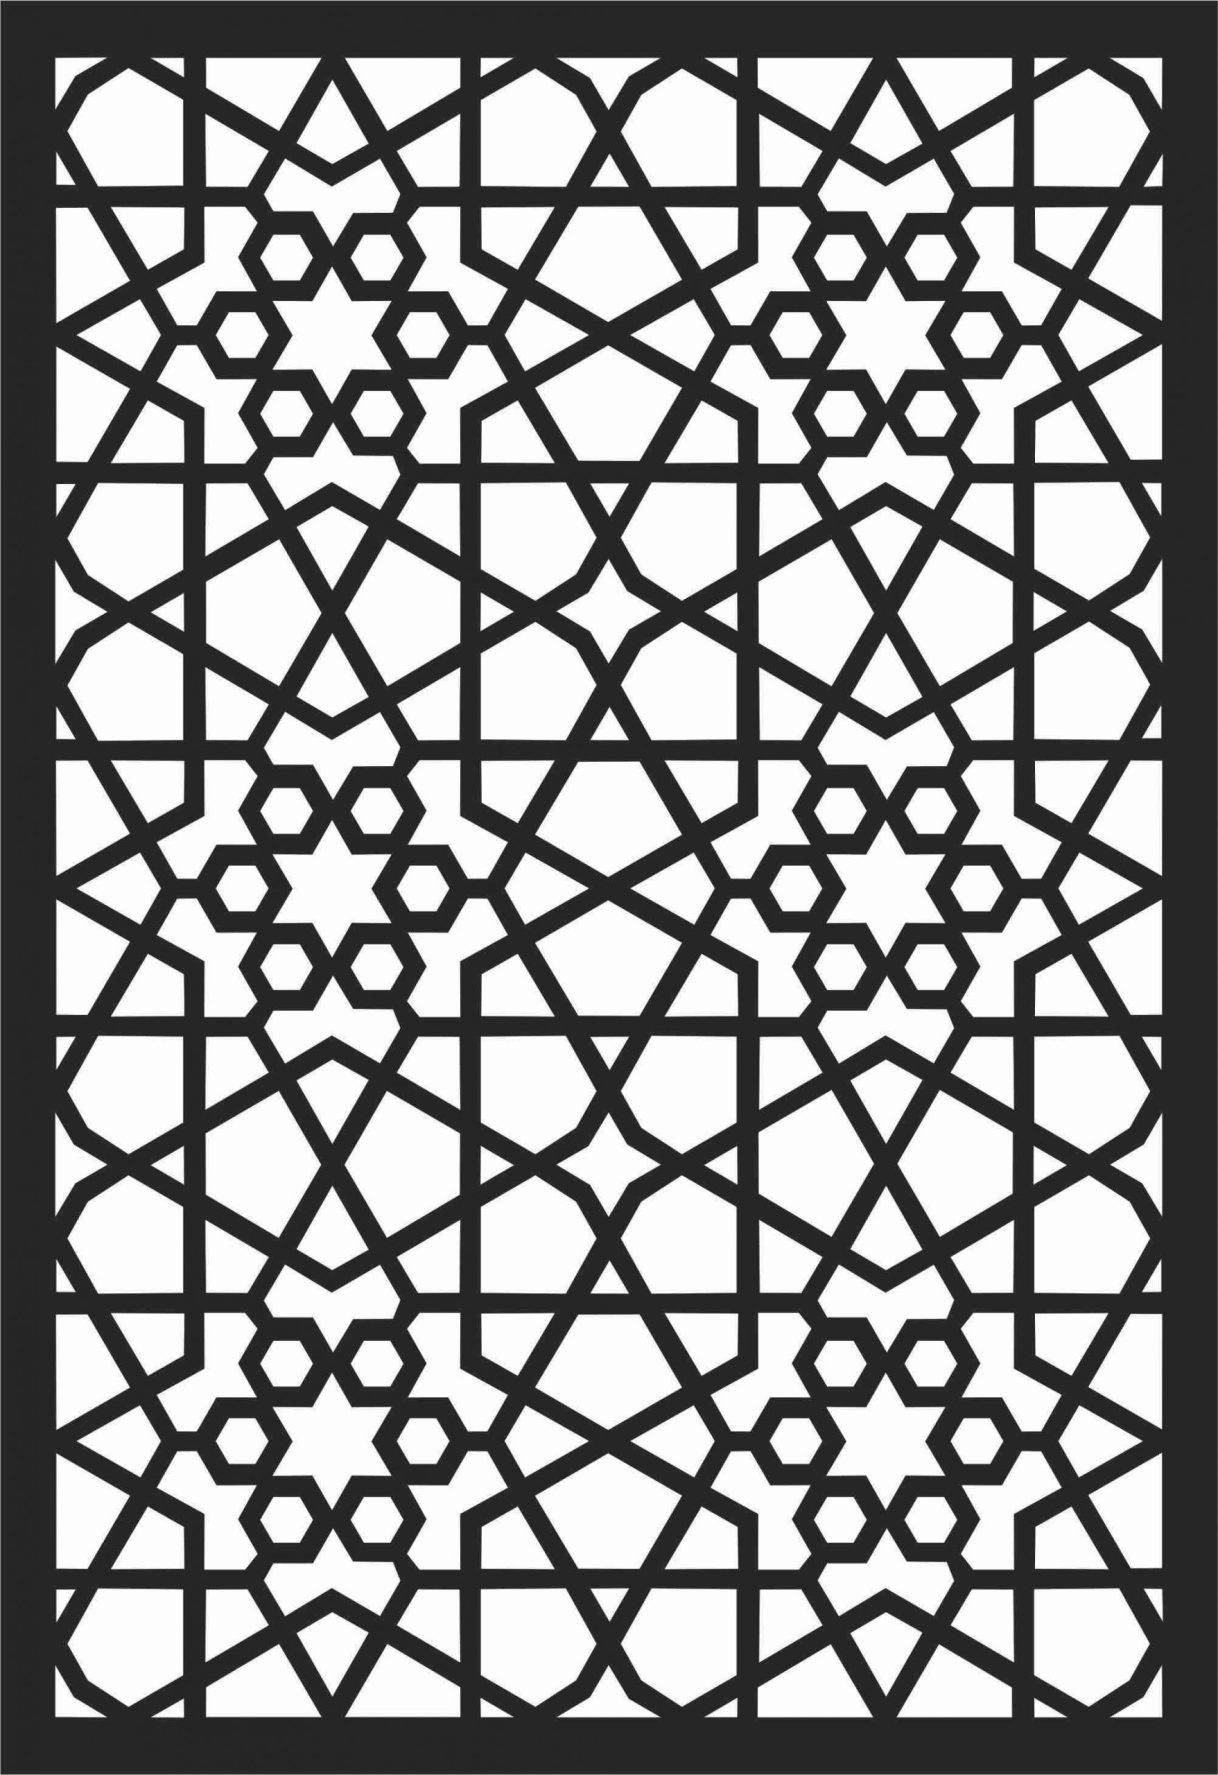 Outstanding Screen Panel for Decorative Metal Divider Screen DXF File